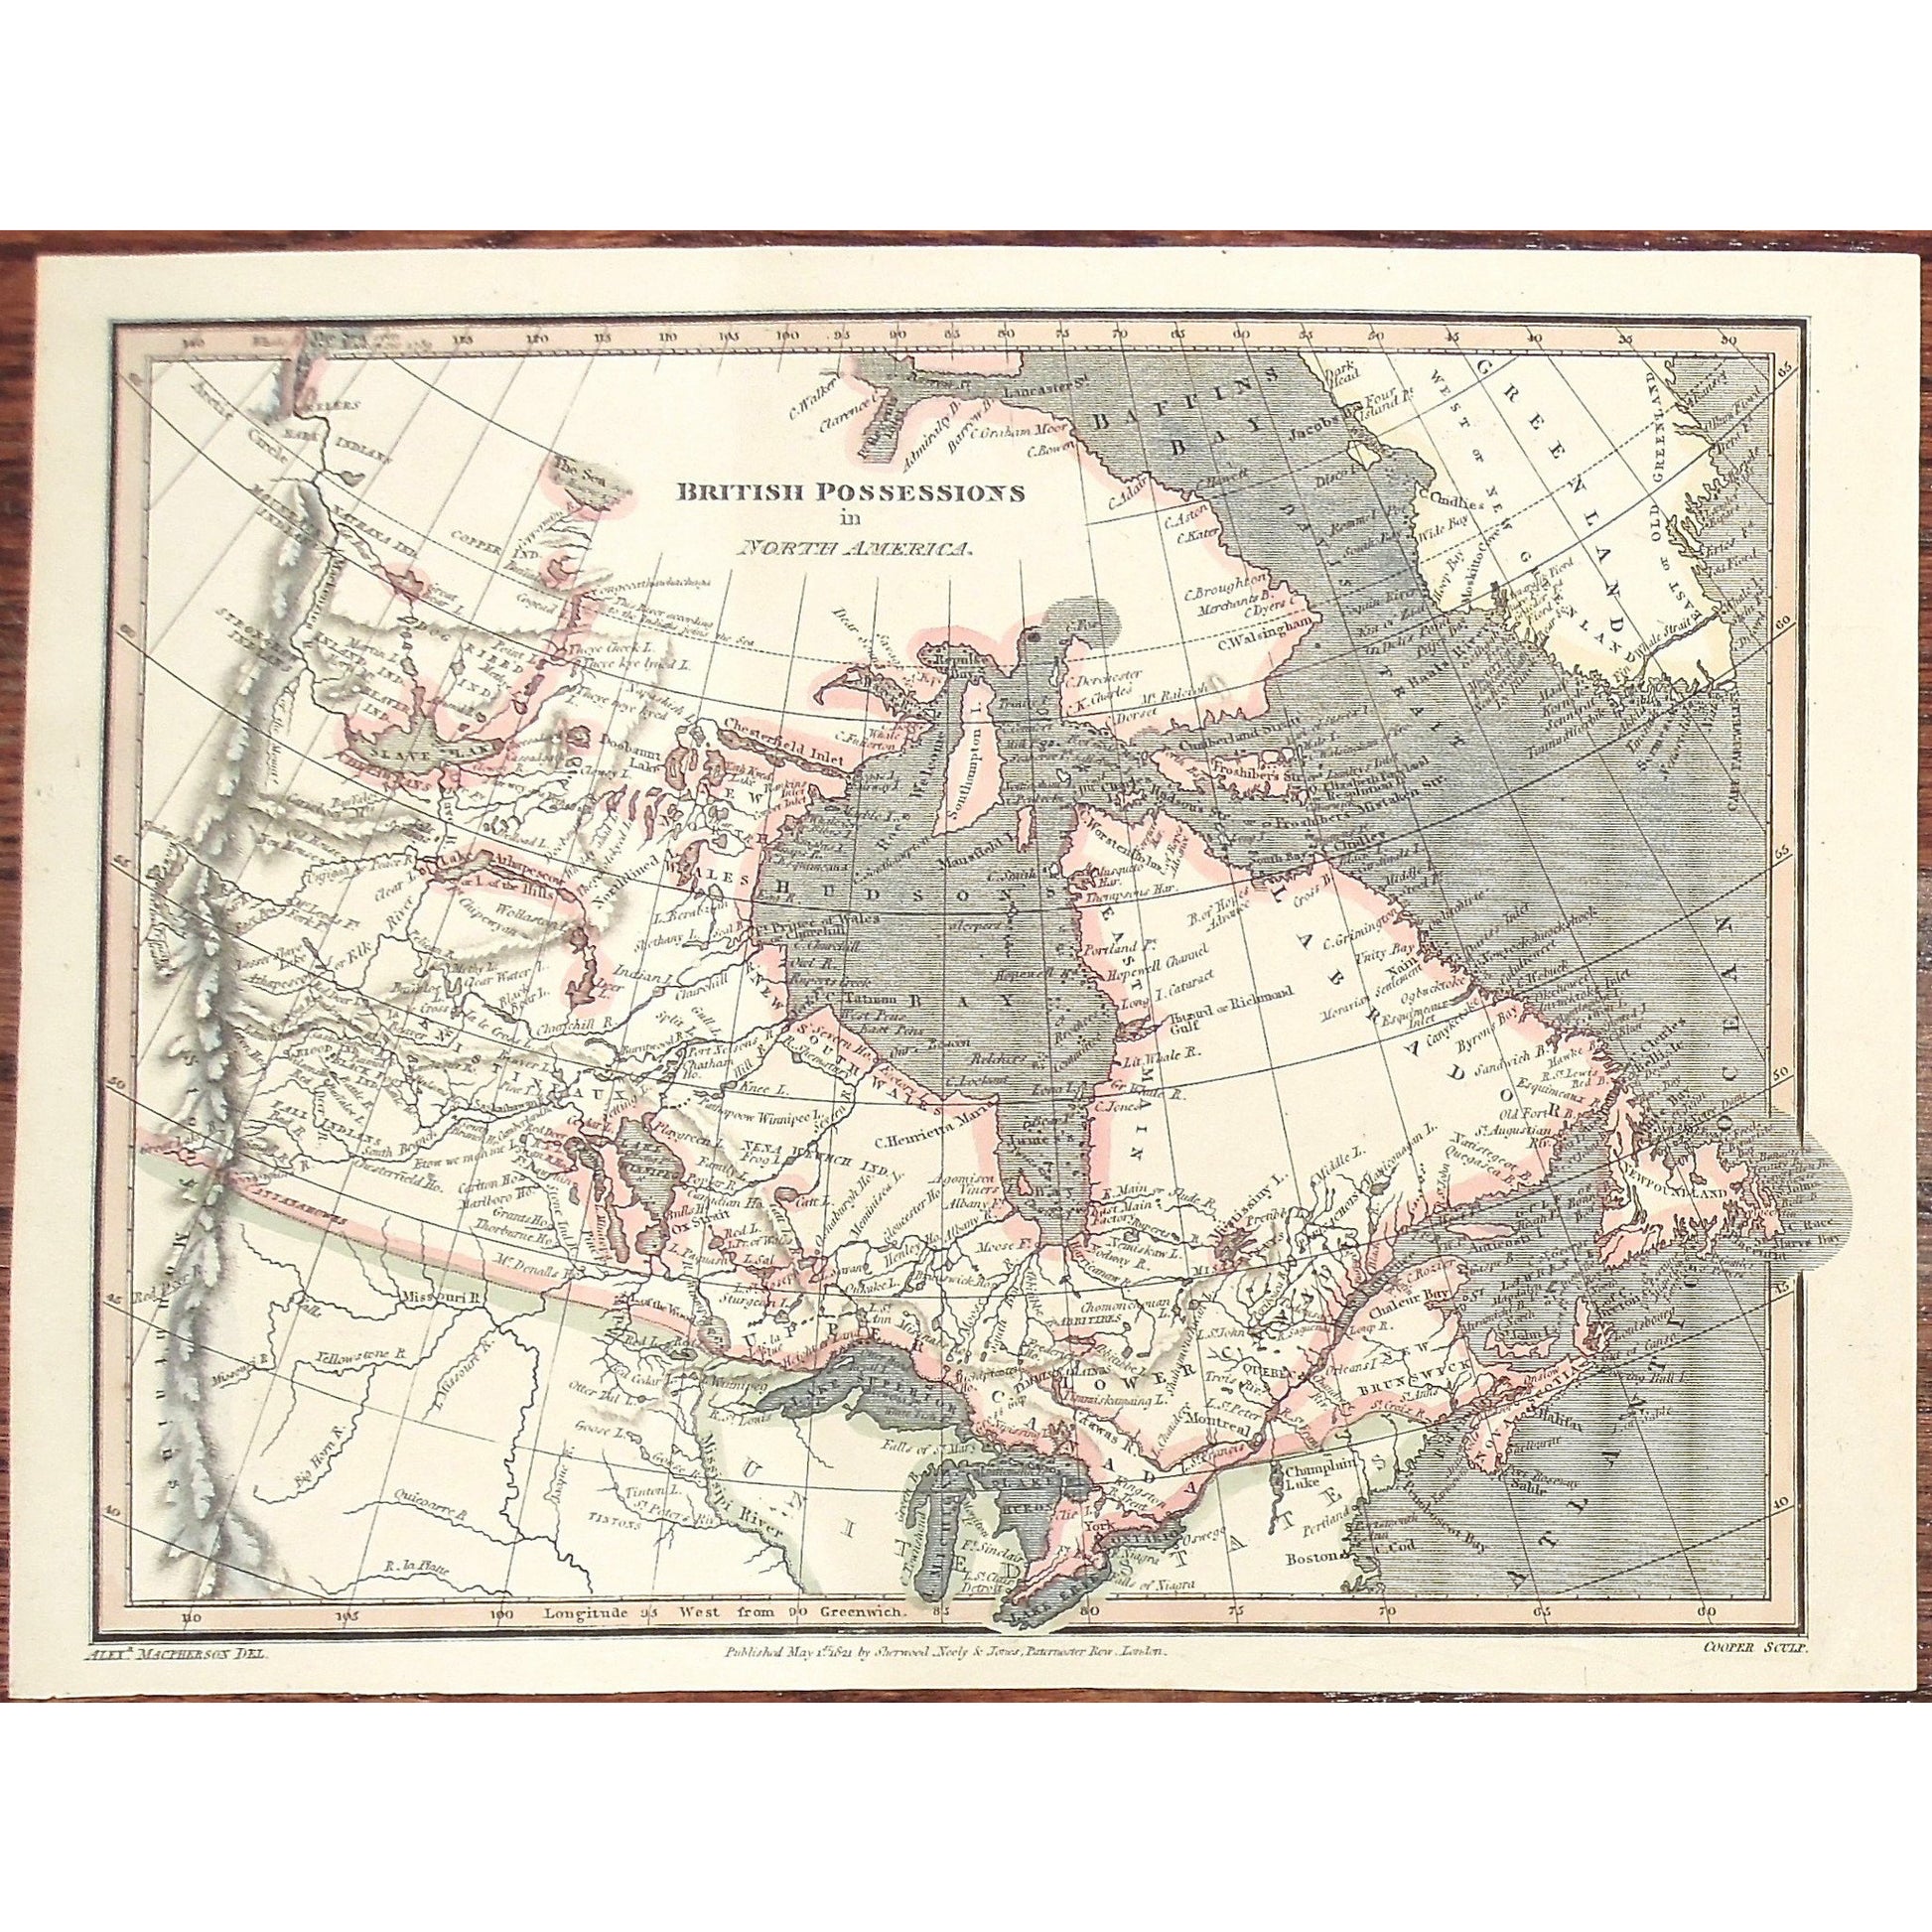 British, Possession, North America, Greenland, Hudson's Bay, Labrador, Baffins Bay, Davis Strait, Nena Wewhch Indians, Copper Indians, Dog Ribbed Indians, Mountain Indians, Strongrow Indians, Fall Indians, Cattanahowes, Knistineaux, New South Wales, New North Wales, Lower Canada, Upper Canada, Great Lakes, East Main, New Brunswick, Newfoundland, Stony Mountains, maps, map, Antique Map, Antique Prints, Artwork, Vintage maps, engraving,